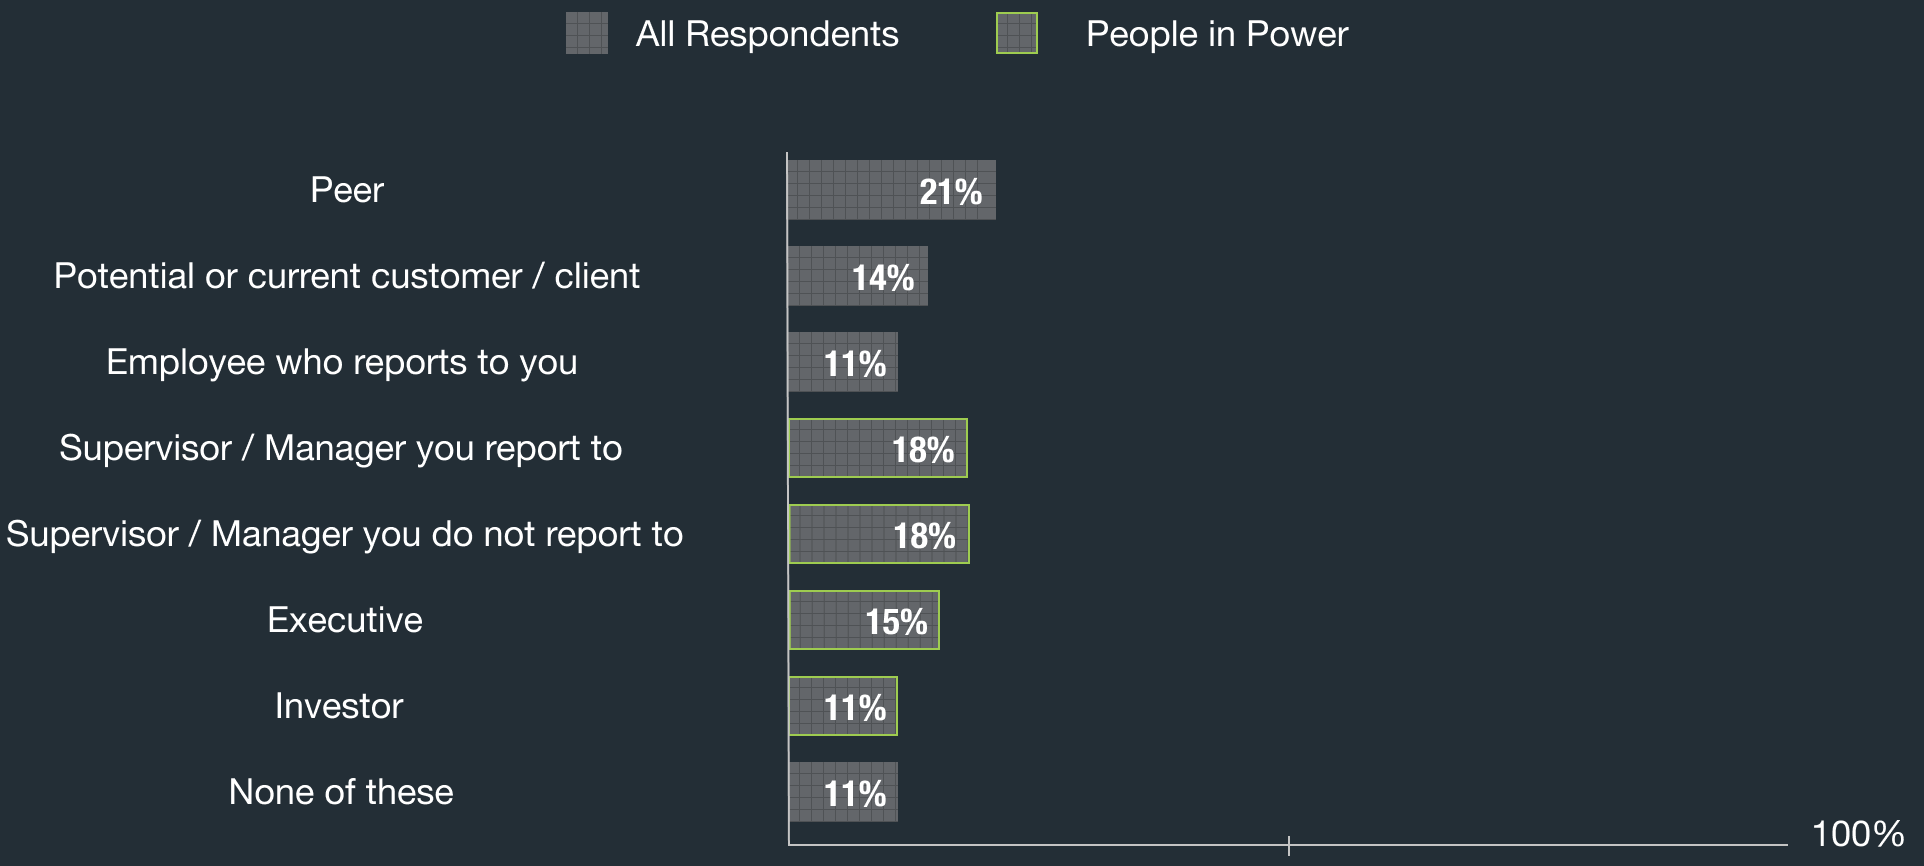 Peer: 21%, Potential or current customer / client: 14%, Employee who reports to you: 11%, Supervisor / Manager you report to (People in Power): 18%, Supervisor / Manager you do not report to (People in Power): 18%, Executive (People in Power): 15%, Investor (People in Power): 11%, None of these: 11%